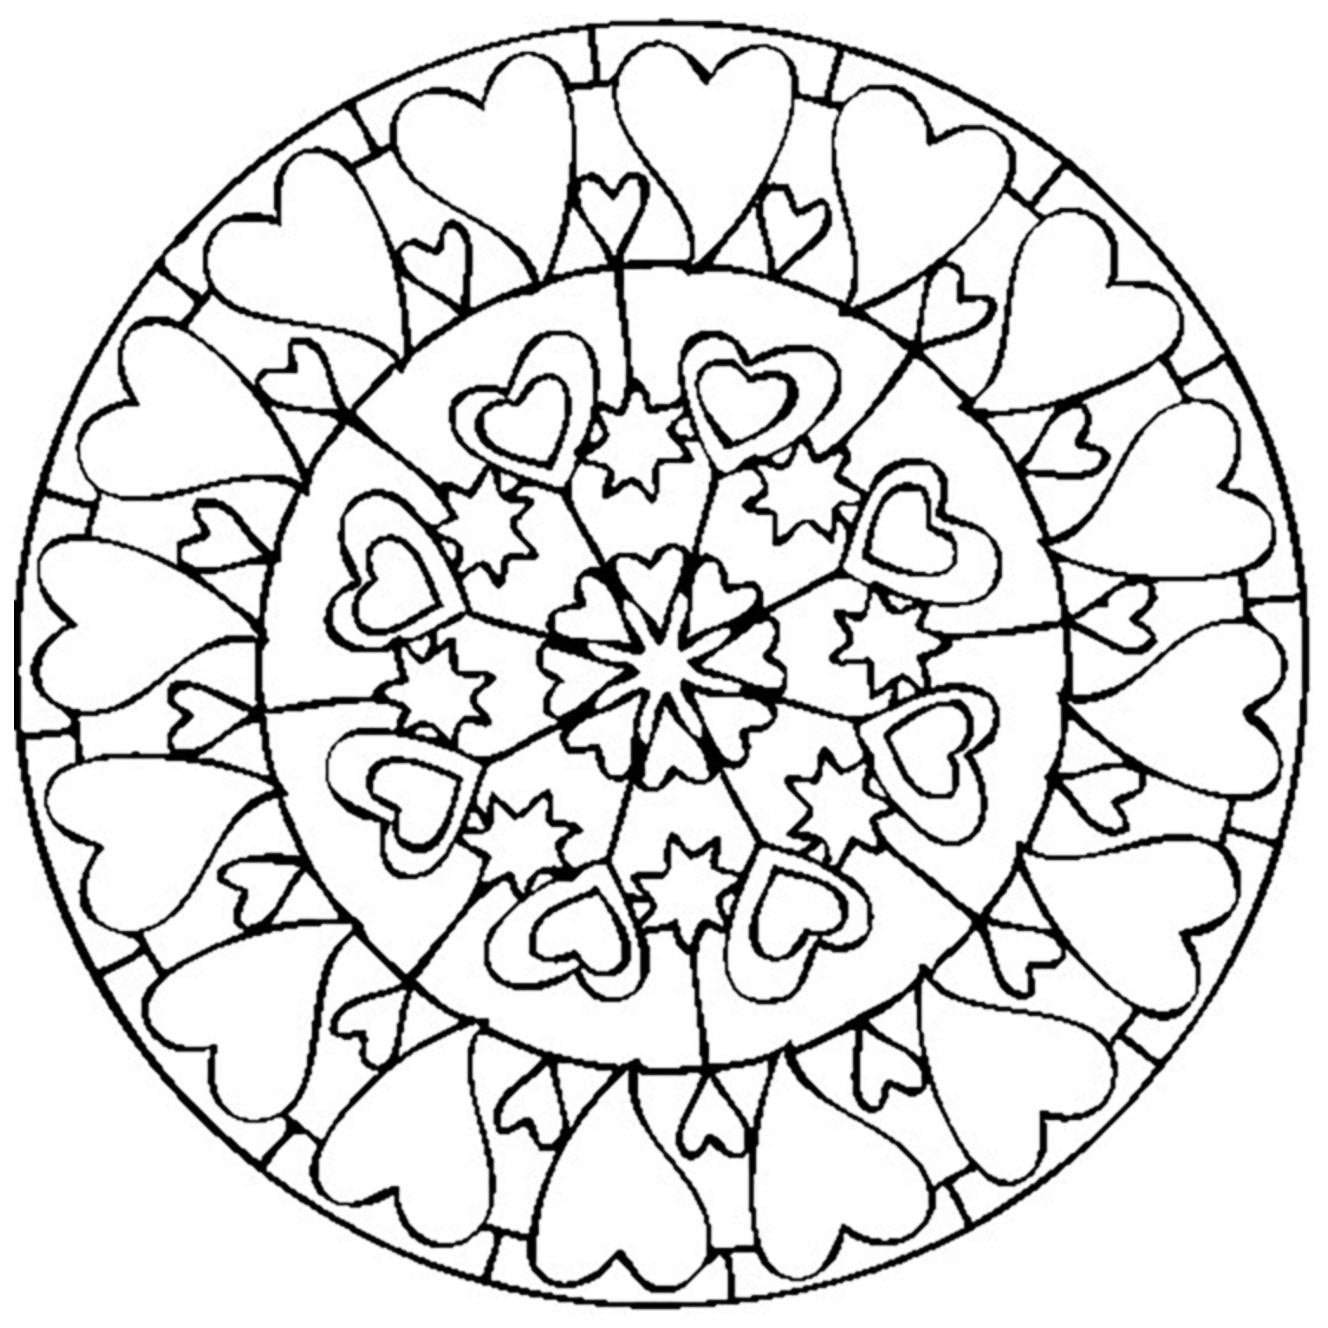 The Love Mandala ! Perfect for Valentine's Day